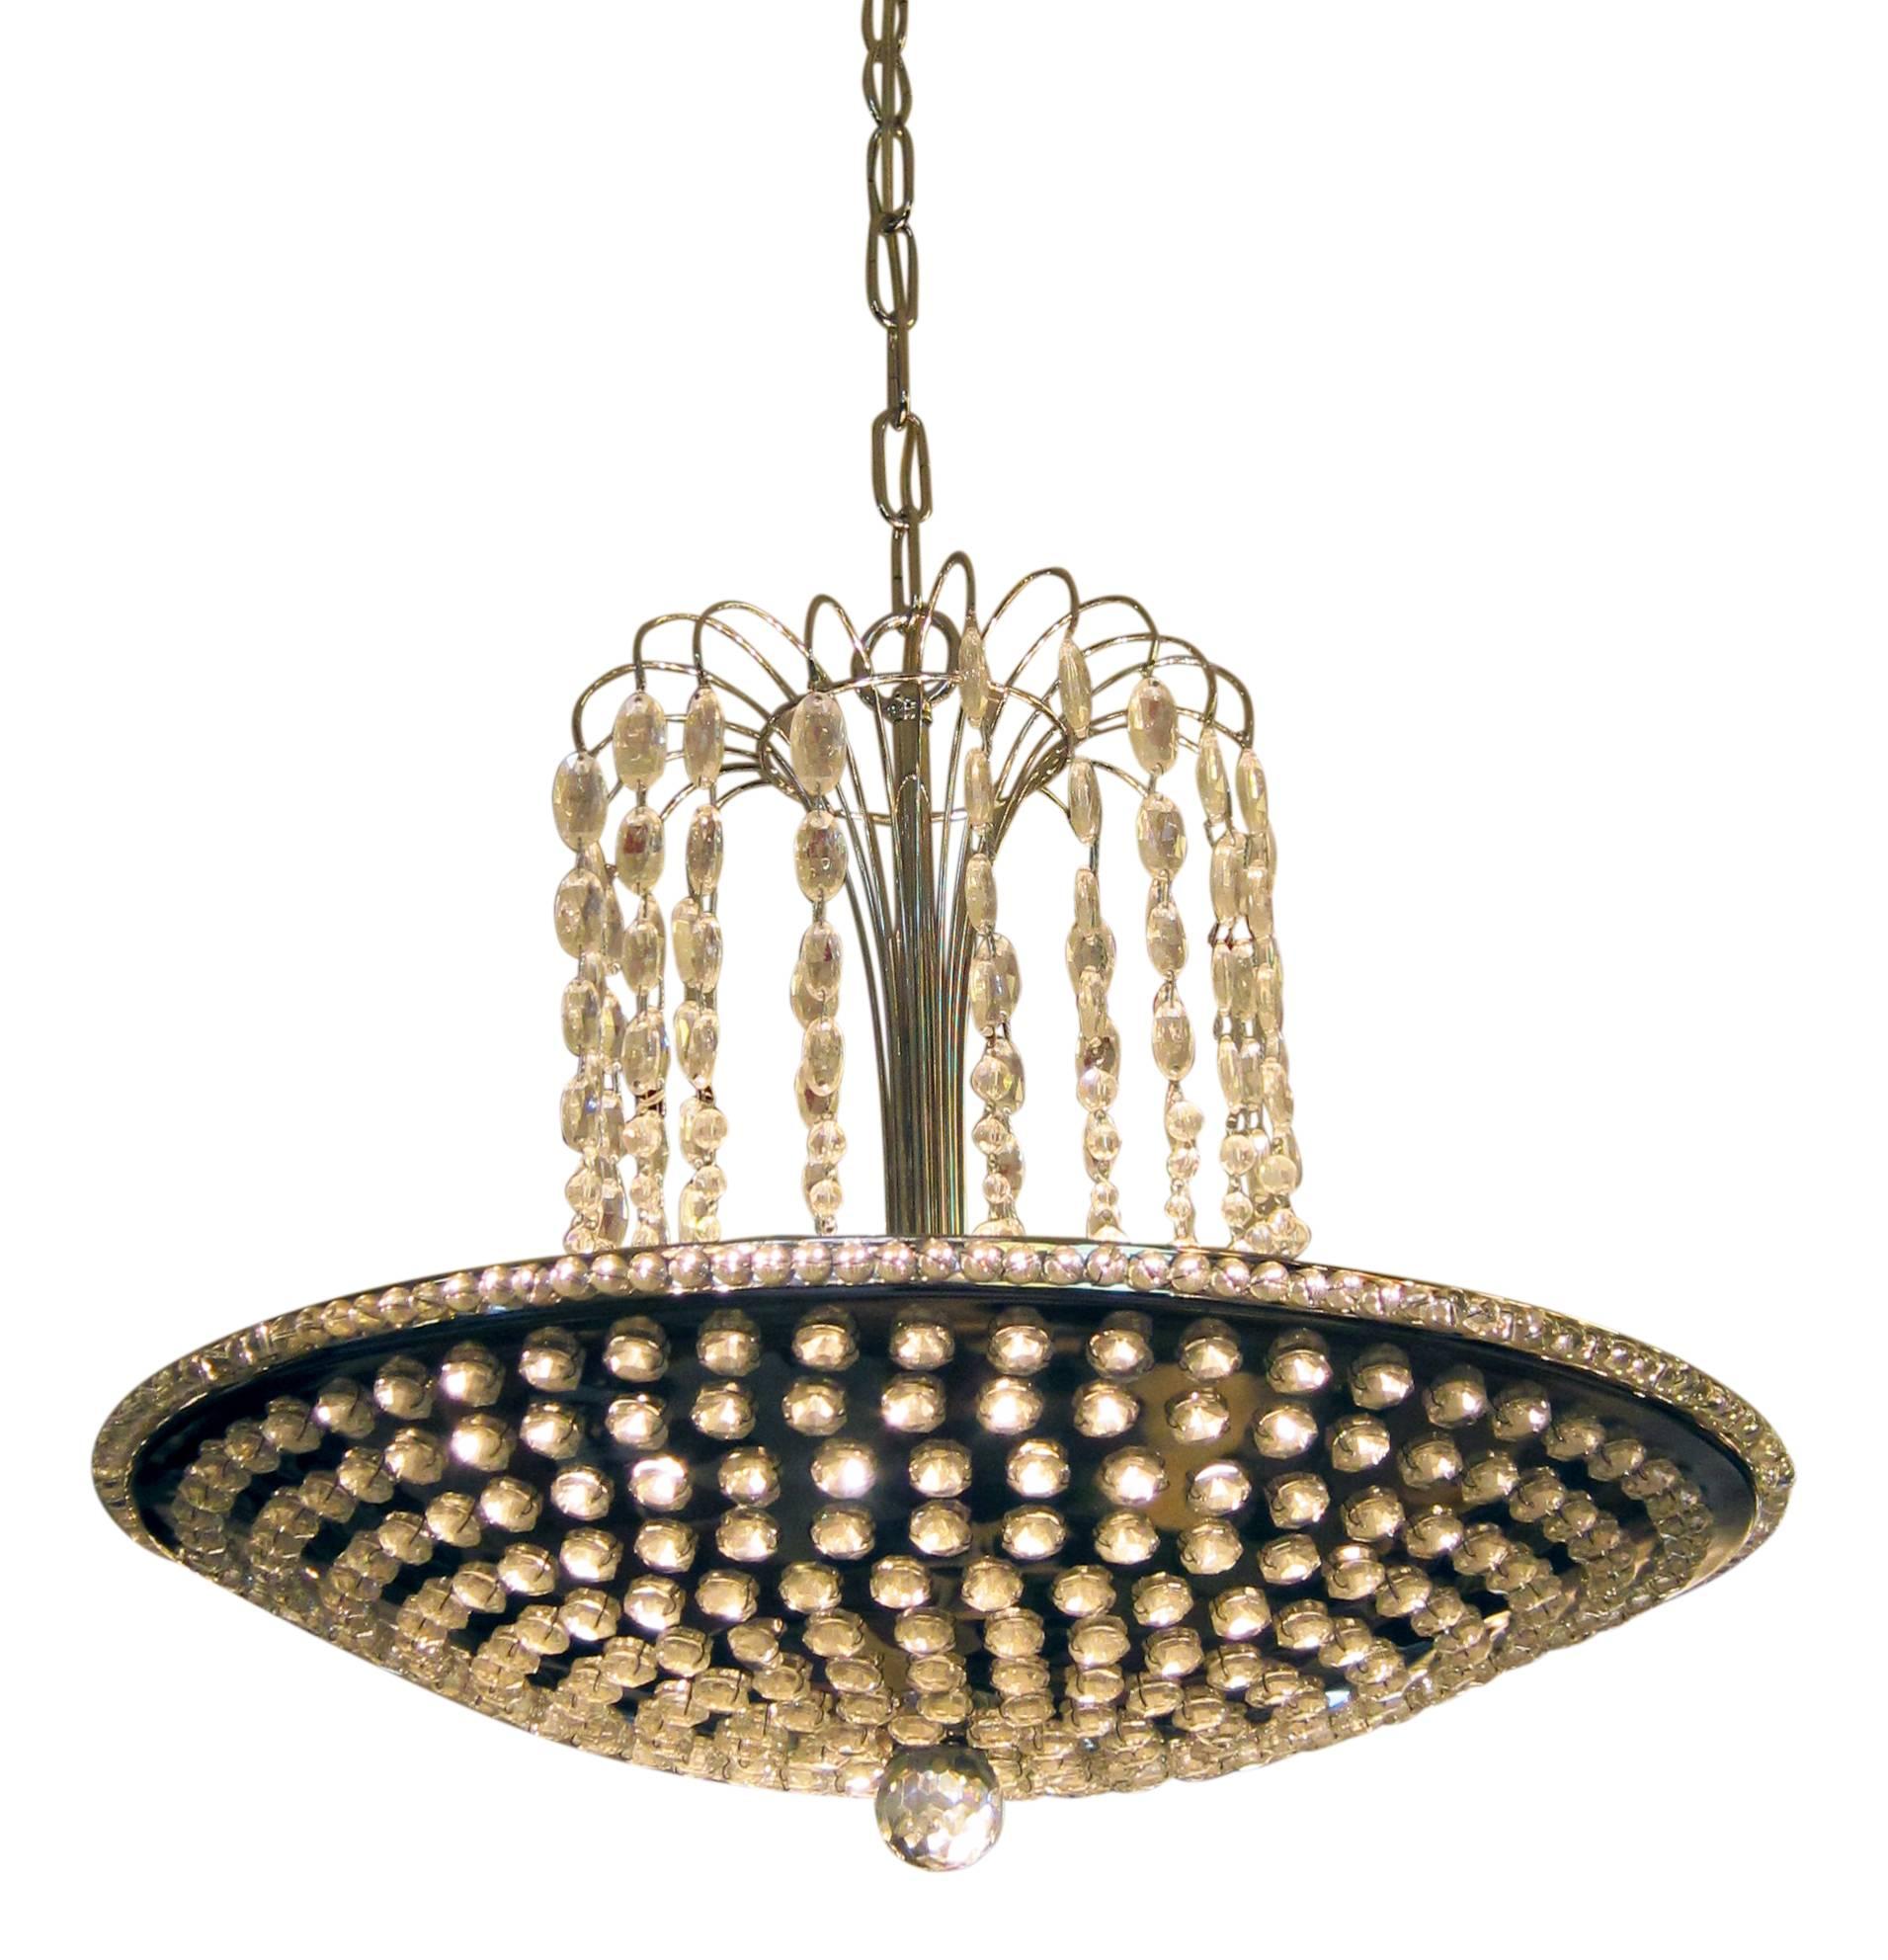 Pendant light featuring cascading teardrop crystals coming off the center stem. Shown in a nickel finish. This item can be viewed at our 5 East 16th St, Union Square location in Manhattan.